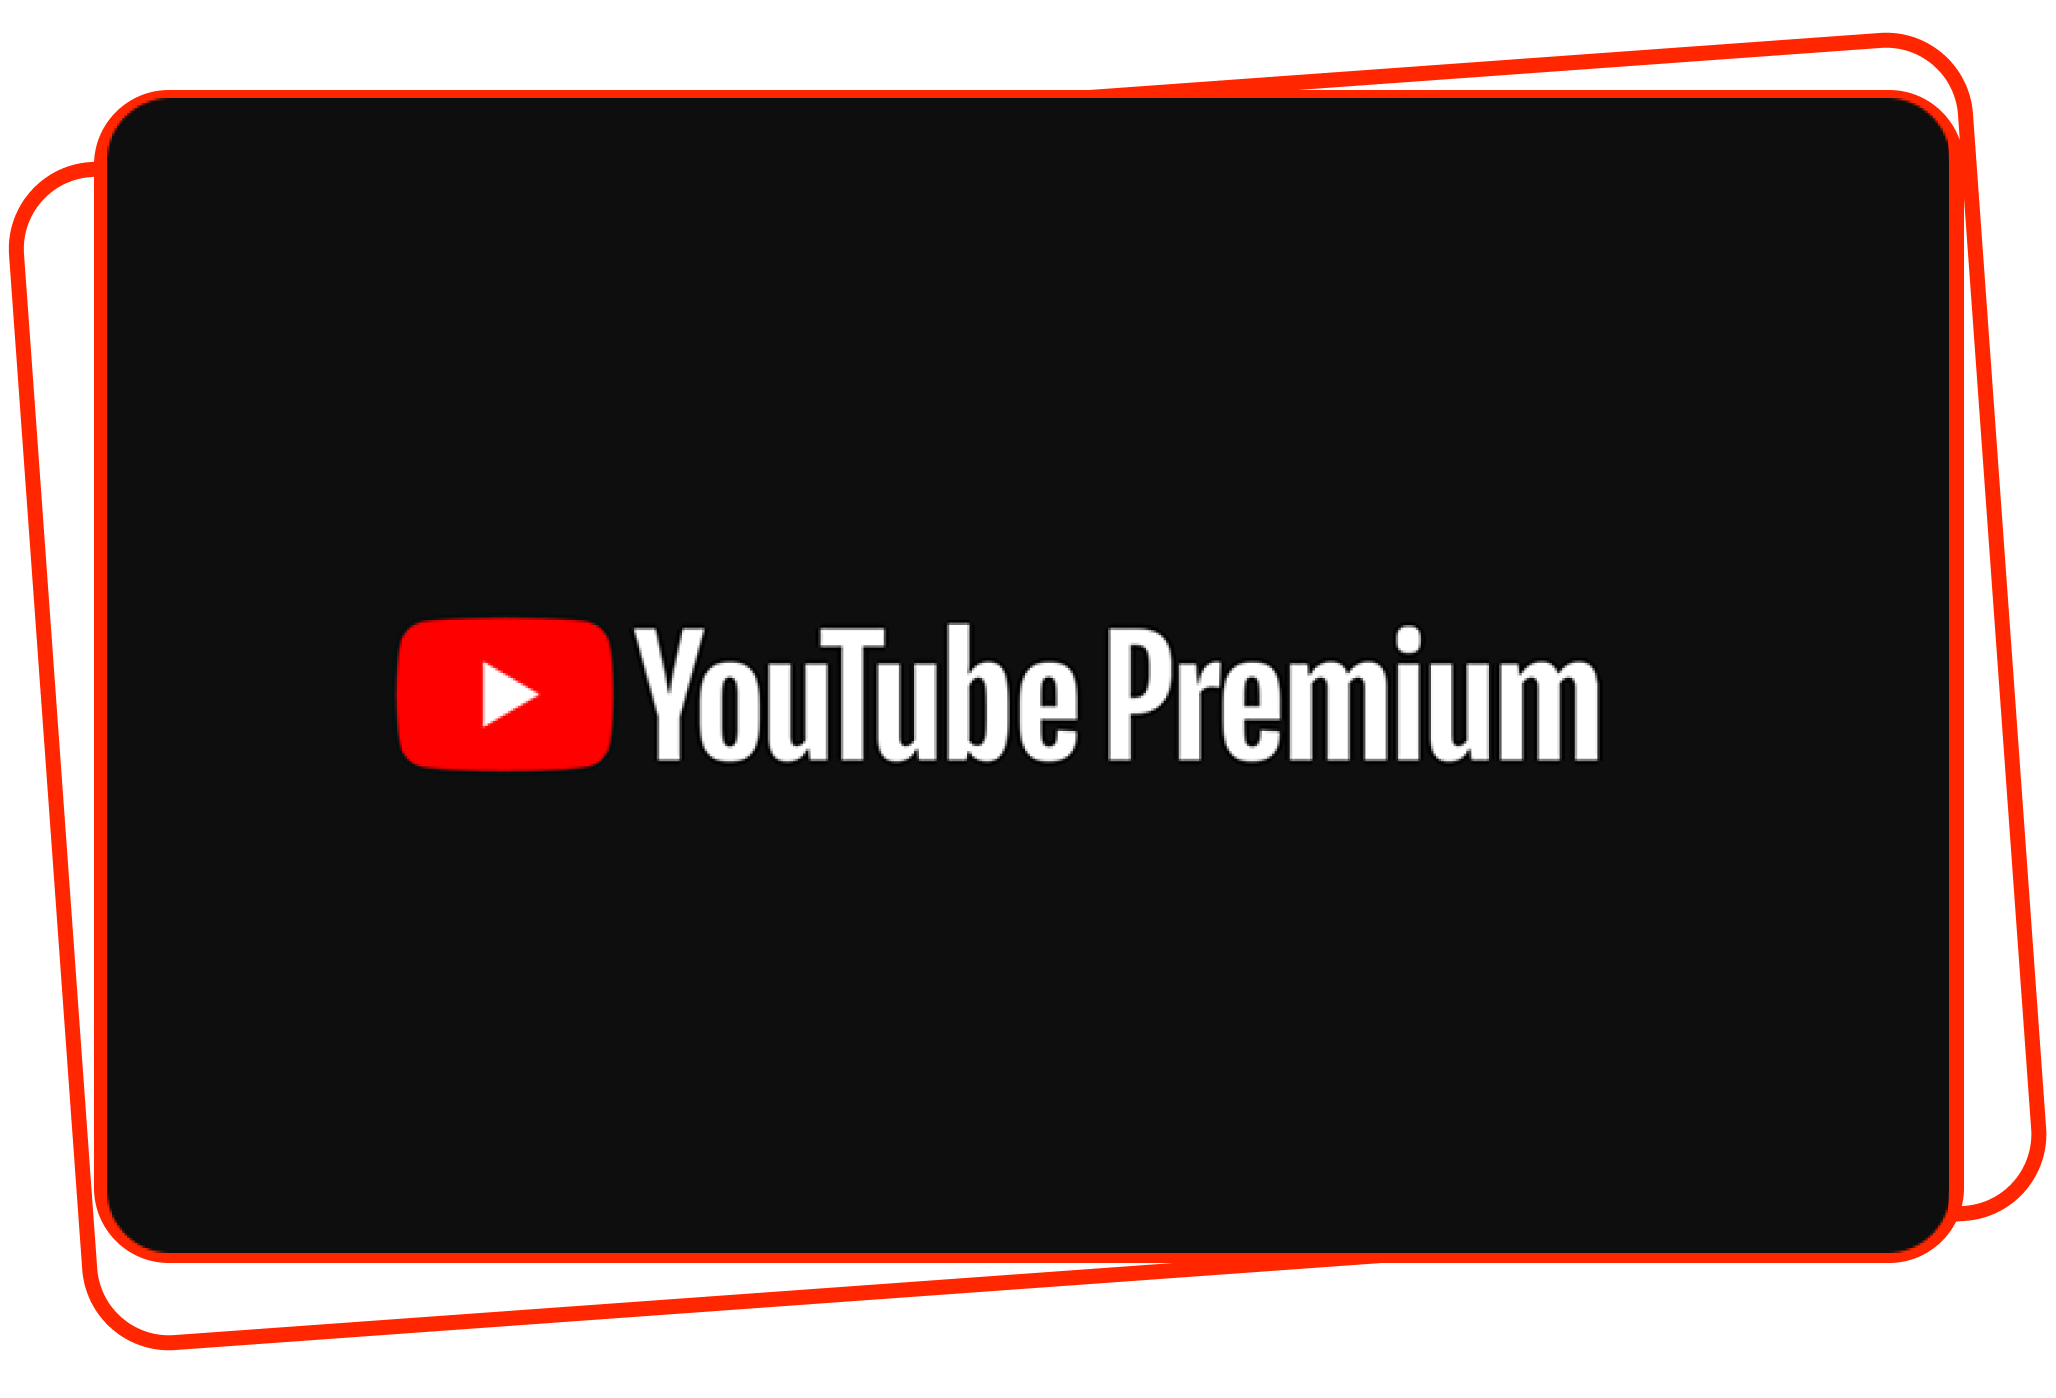 Why YouTube Premium will move its original TV shows in front of the paywall  - Digiday